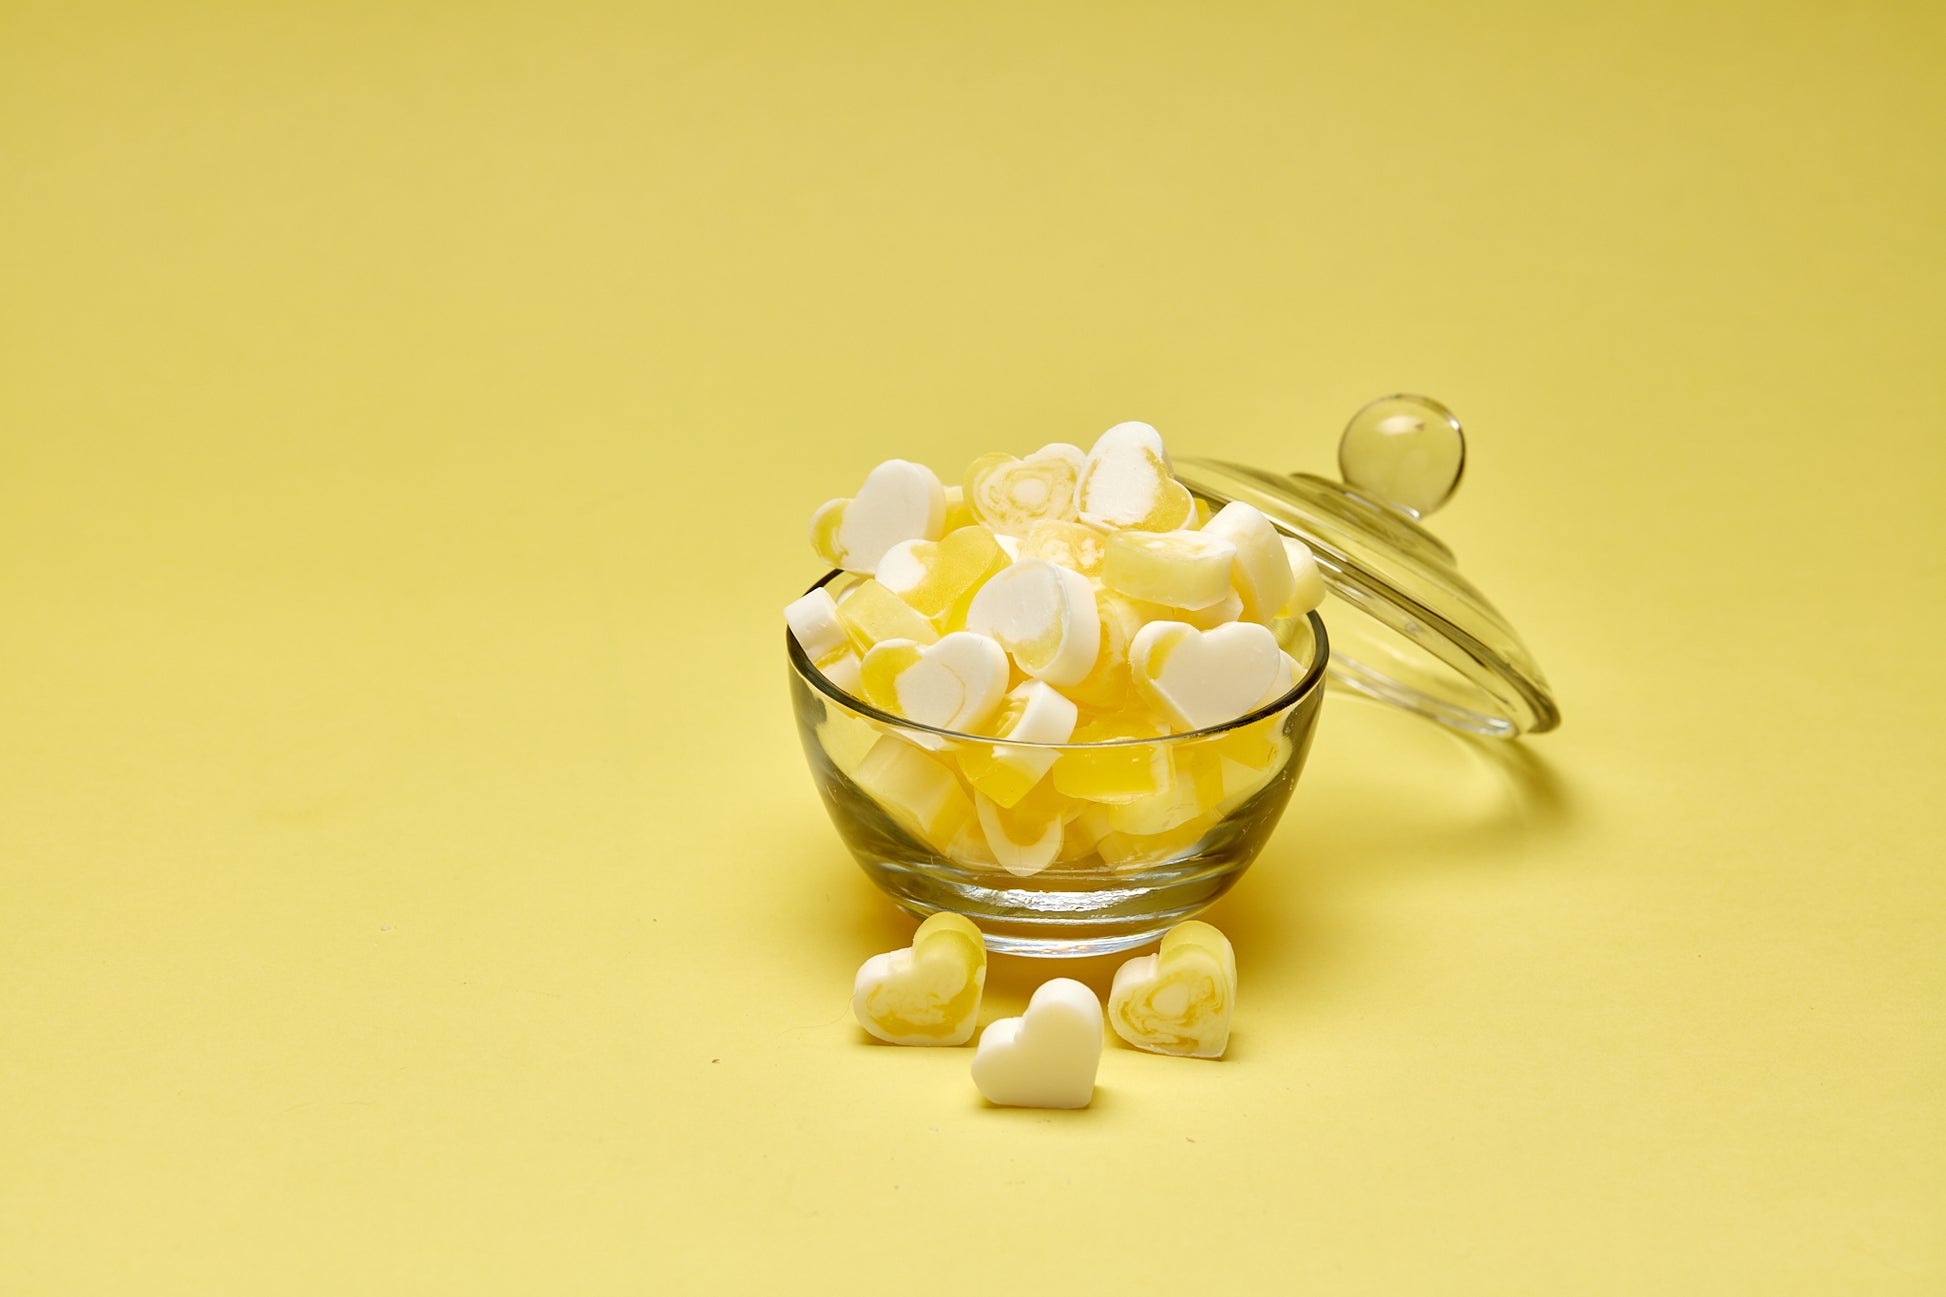 A photo of heart shaped yellow and white mini soaps in a glass bowl, lid leaning against it on a yellow background.